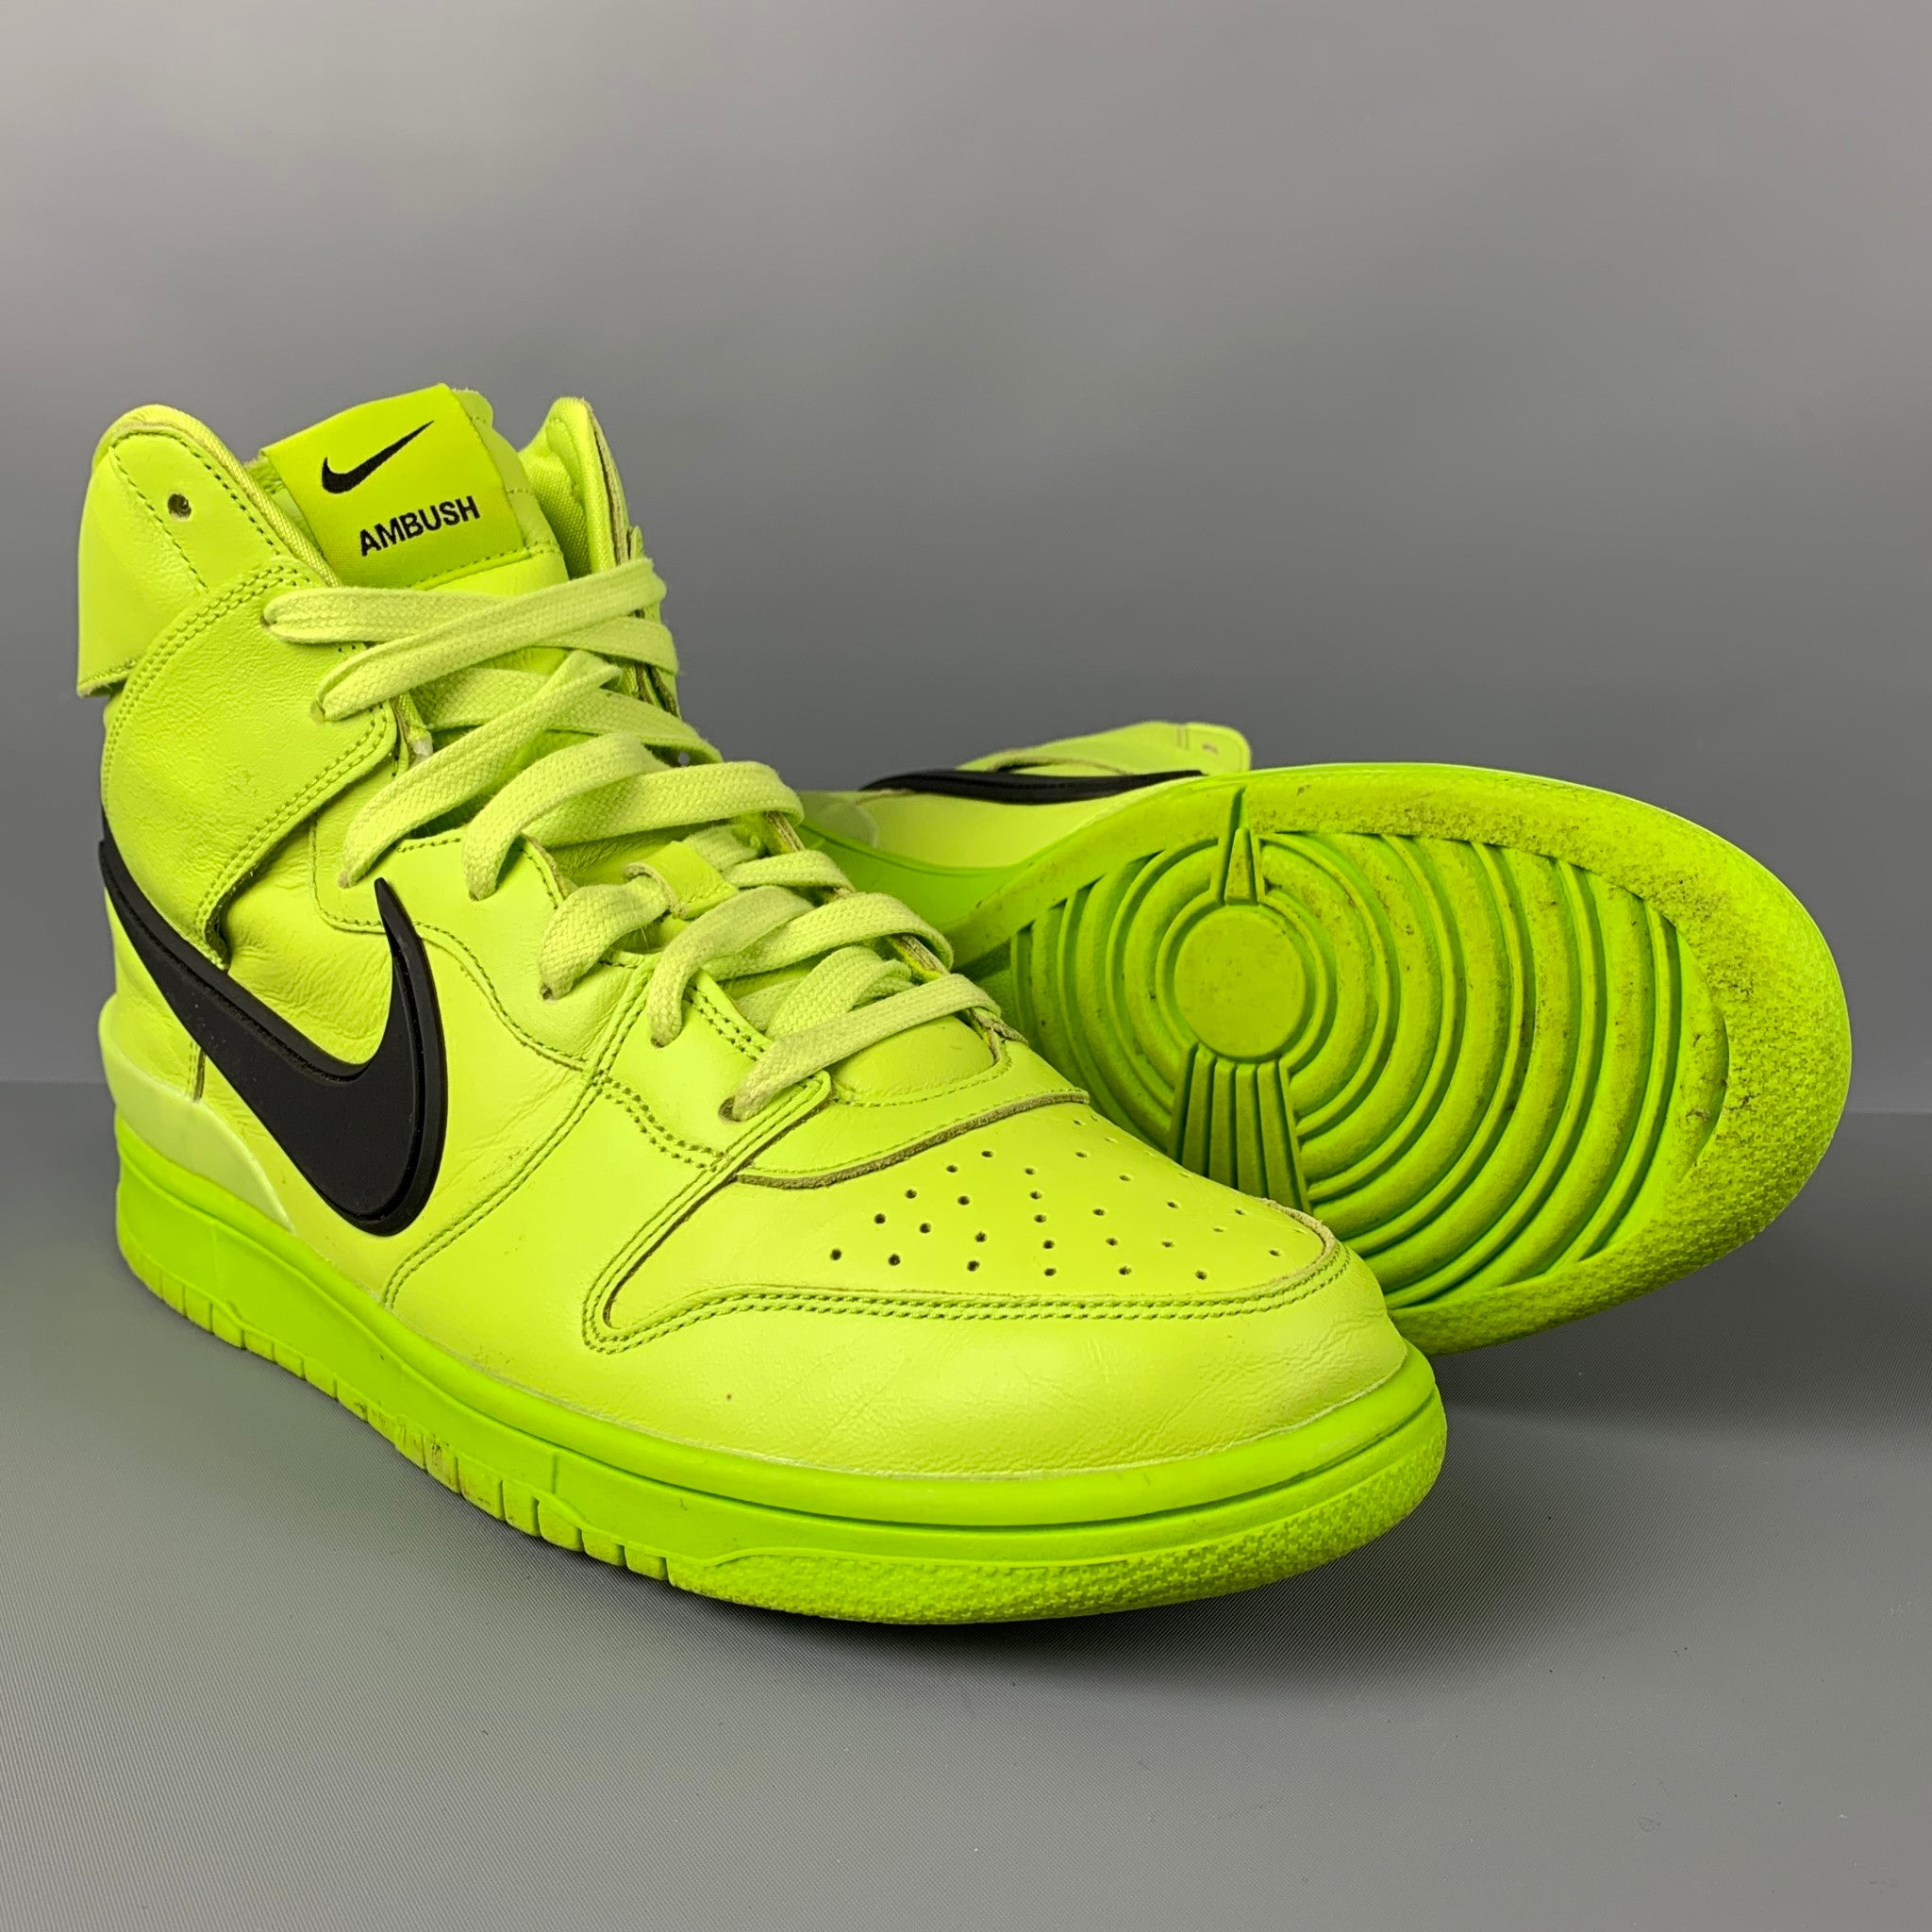 AMBUSH x Nike Size 10.5 Flash Lime Leather High Top Sneakers – Sui 